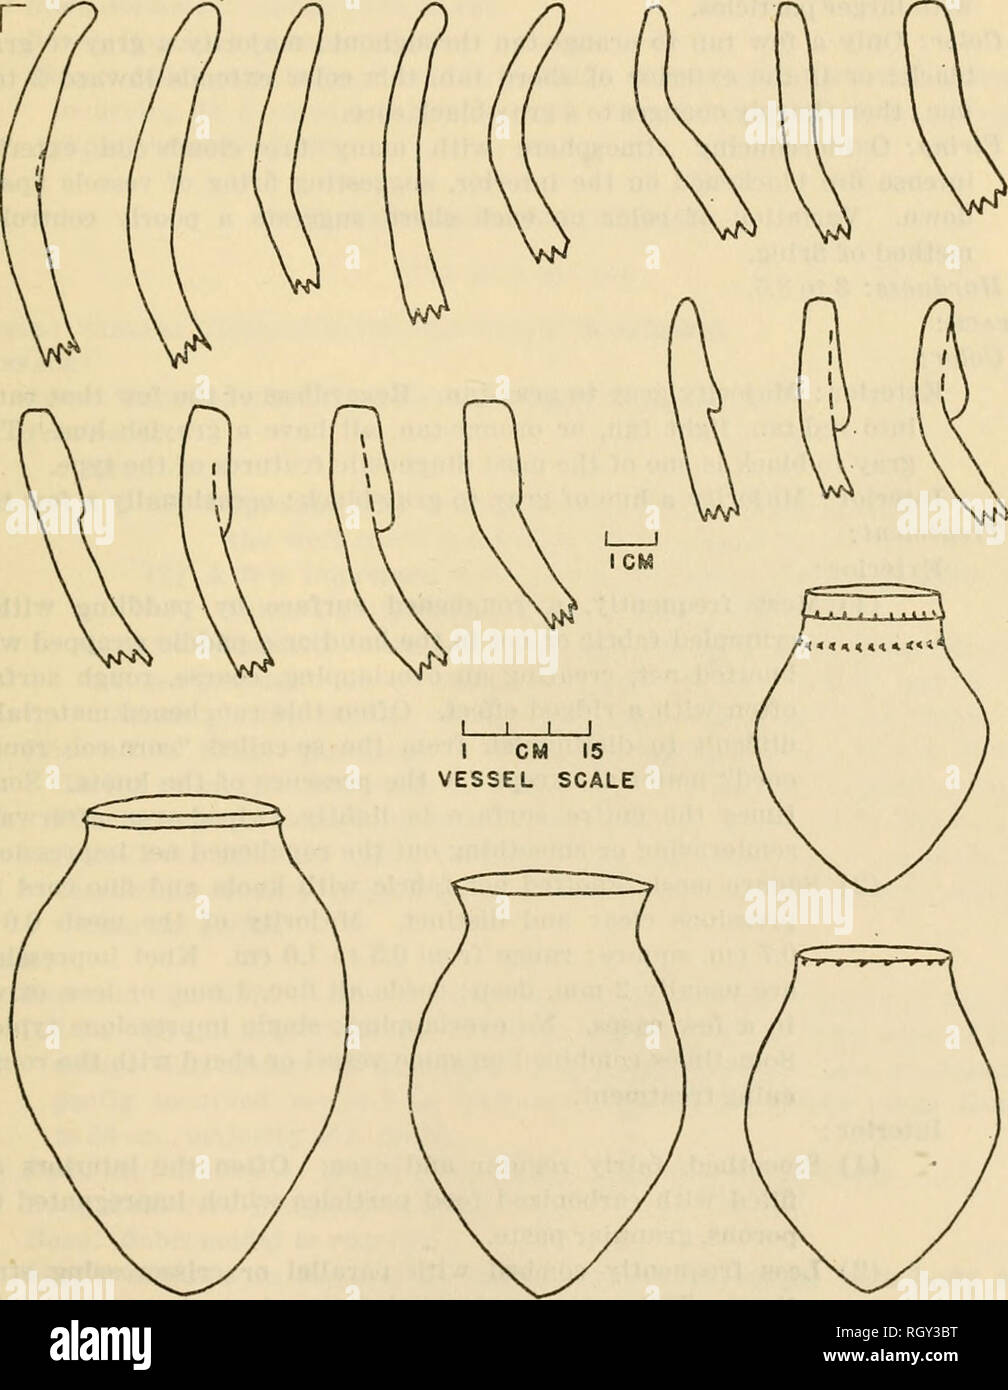 . Bulletin. Ethnology. Evans] A CERAMIC STUDY OF VIRGINIA ARCHEOLOGY 49 Body wall thickness: 0.5 to O.G cm. Body diameter: 26 to 28 cm. Base: No sherds; probably rounded or subconoidal, as is typical of the Chickahominy Series. Shape: Probably a pot form with slightly outsloping sidewalls. CLARKSVILI.E SERIES The Clarksville Series consists of a group of pottery types on a ware typically gray-tan to gray-orange, fired in a poorly controlled, oxidoredncing atmosphere, with a sandy to gritty texture, sand temper ranging from fine to medium particles, but never reaching fine gravel, and with dist Stock Photo